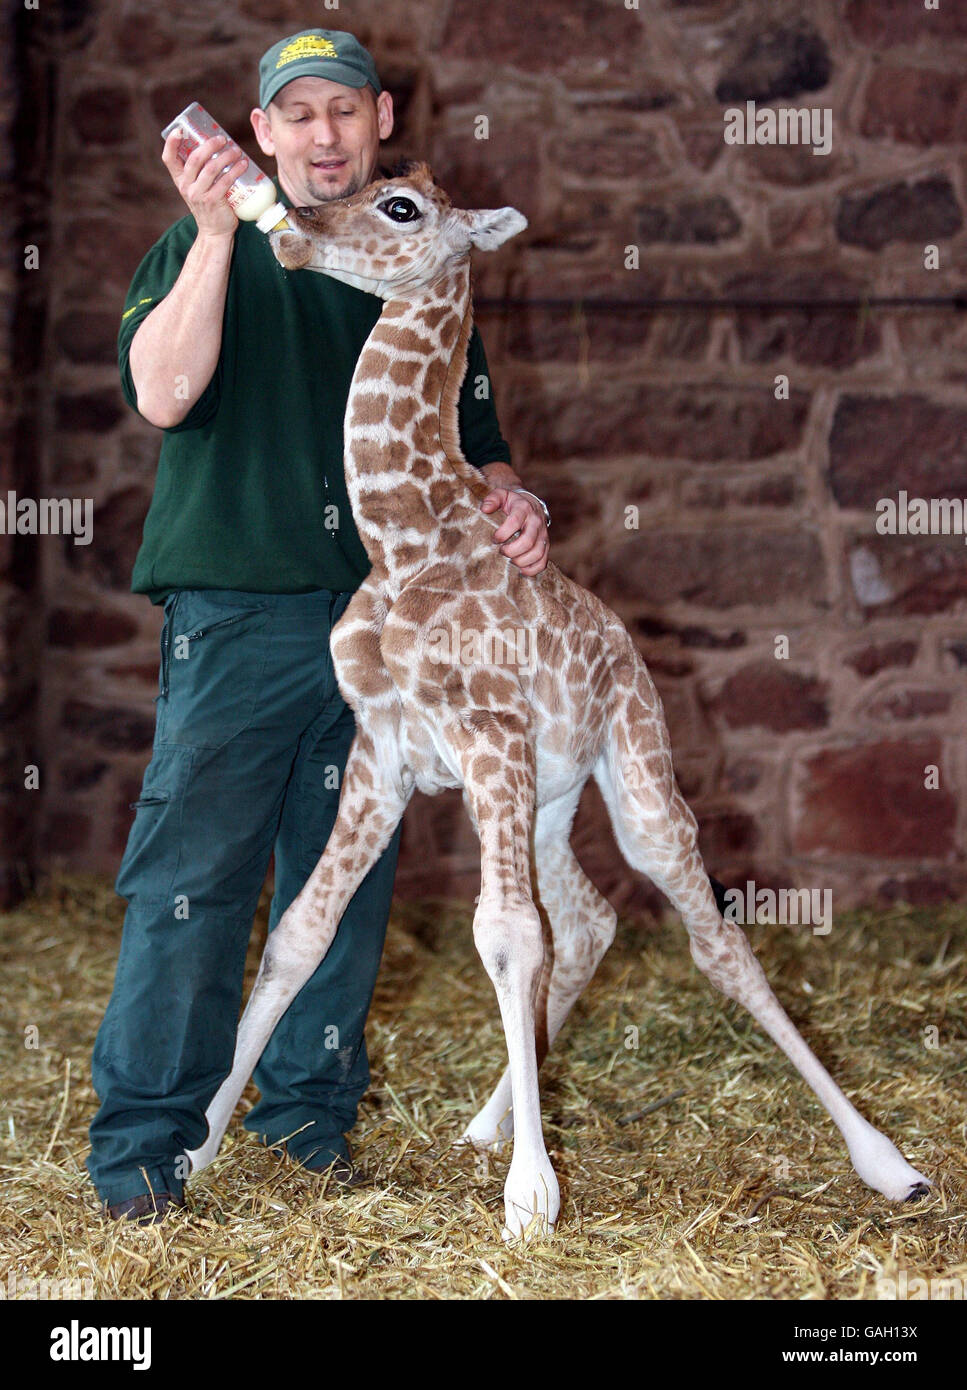 Hand-reared baby giraffe. Margaret, a 10-day-old Rothchild giraffe, who is being hand reared by Tim Rowlands at Chester Zoo. Stock Photo